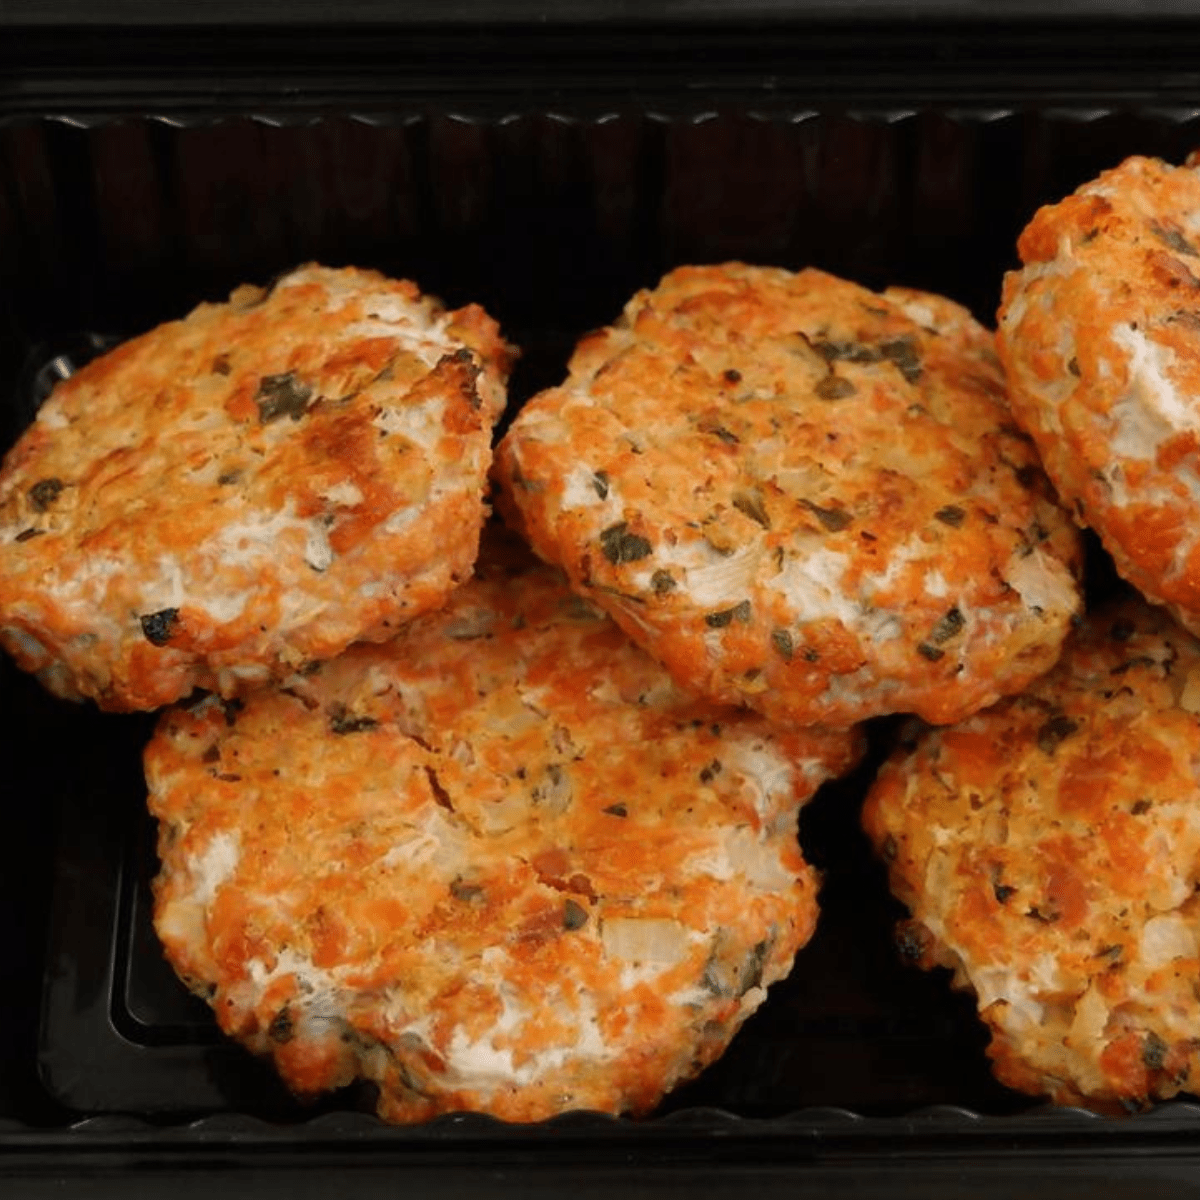 Salmon Cakes are a softer meal which is important when we're cooking for homeless populations. Salmon adds a lot of variety to their diet and we love that we can add fresh veggies.